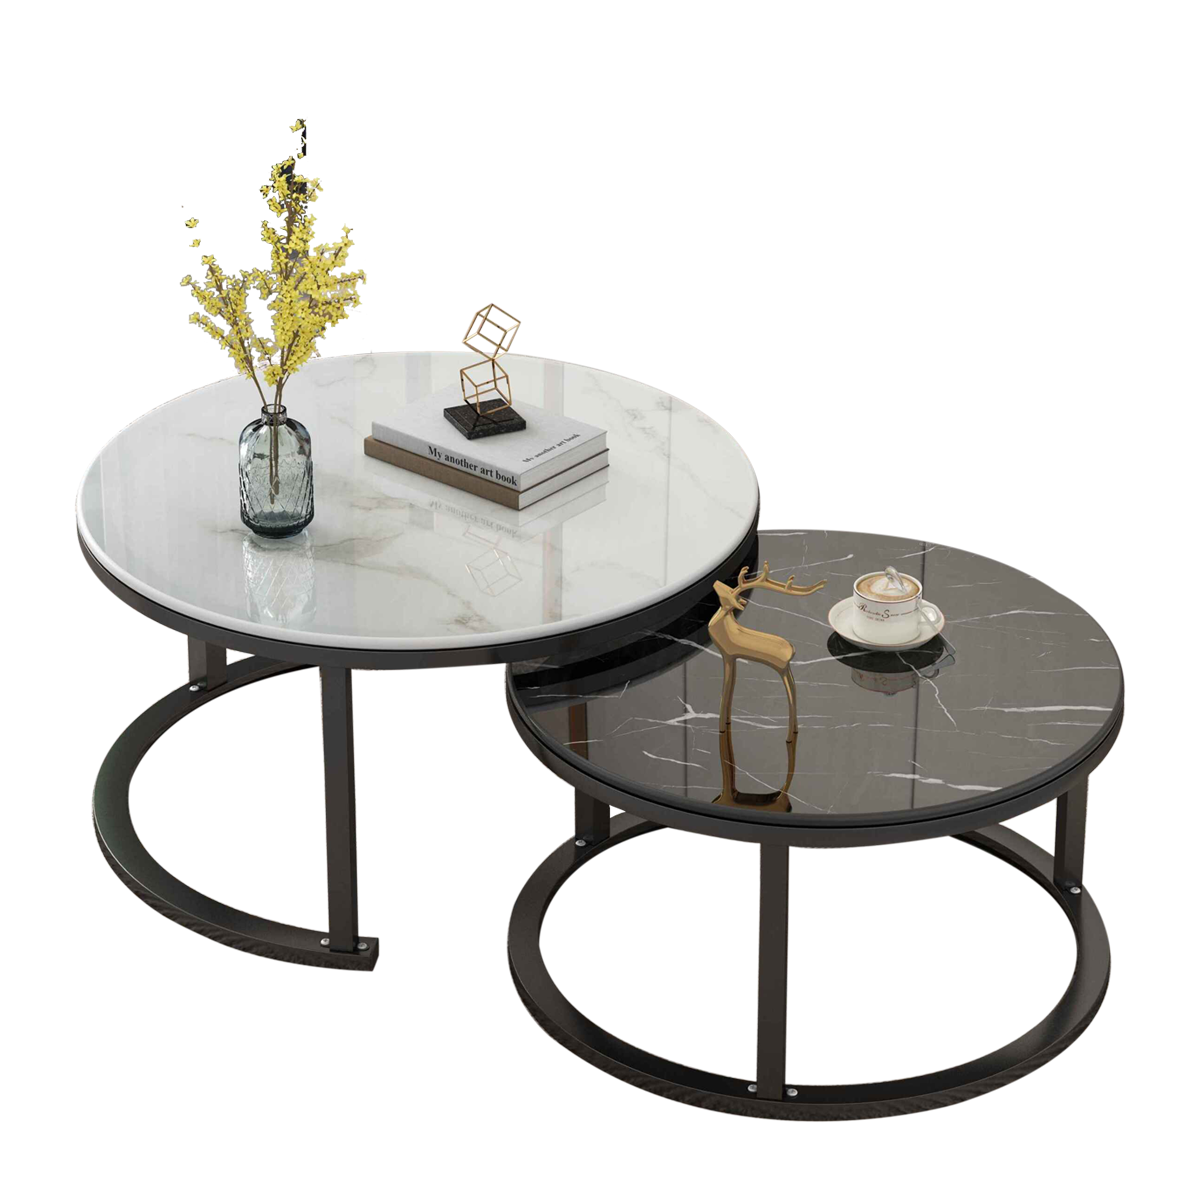 Foret Coffee Table Nesting Side Tables 2pc Set Tea Marble Look Glass finish